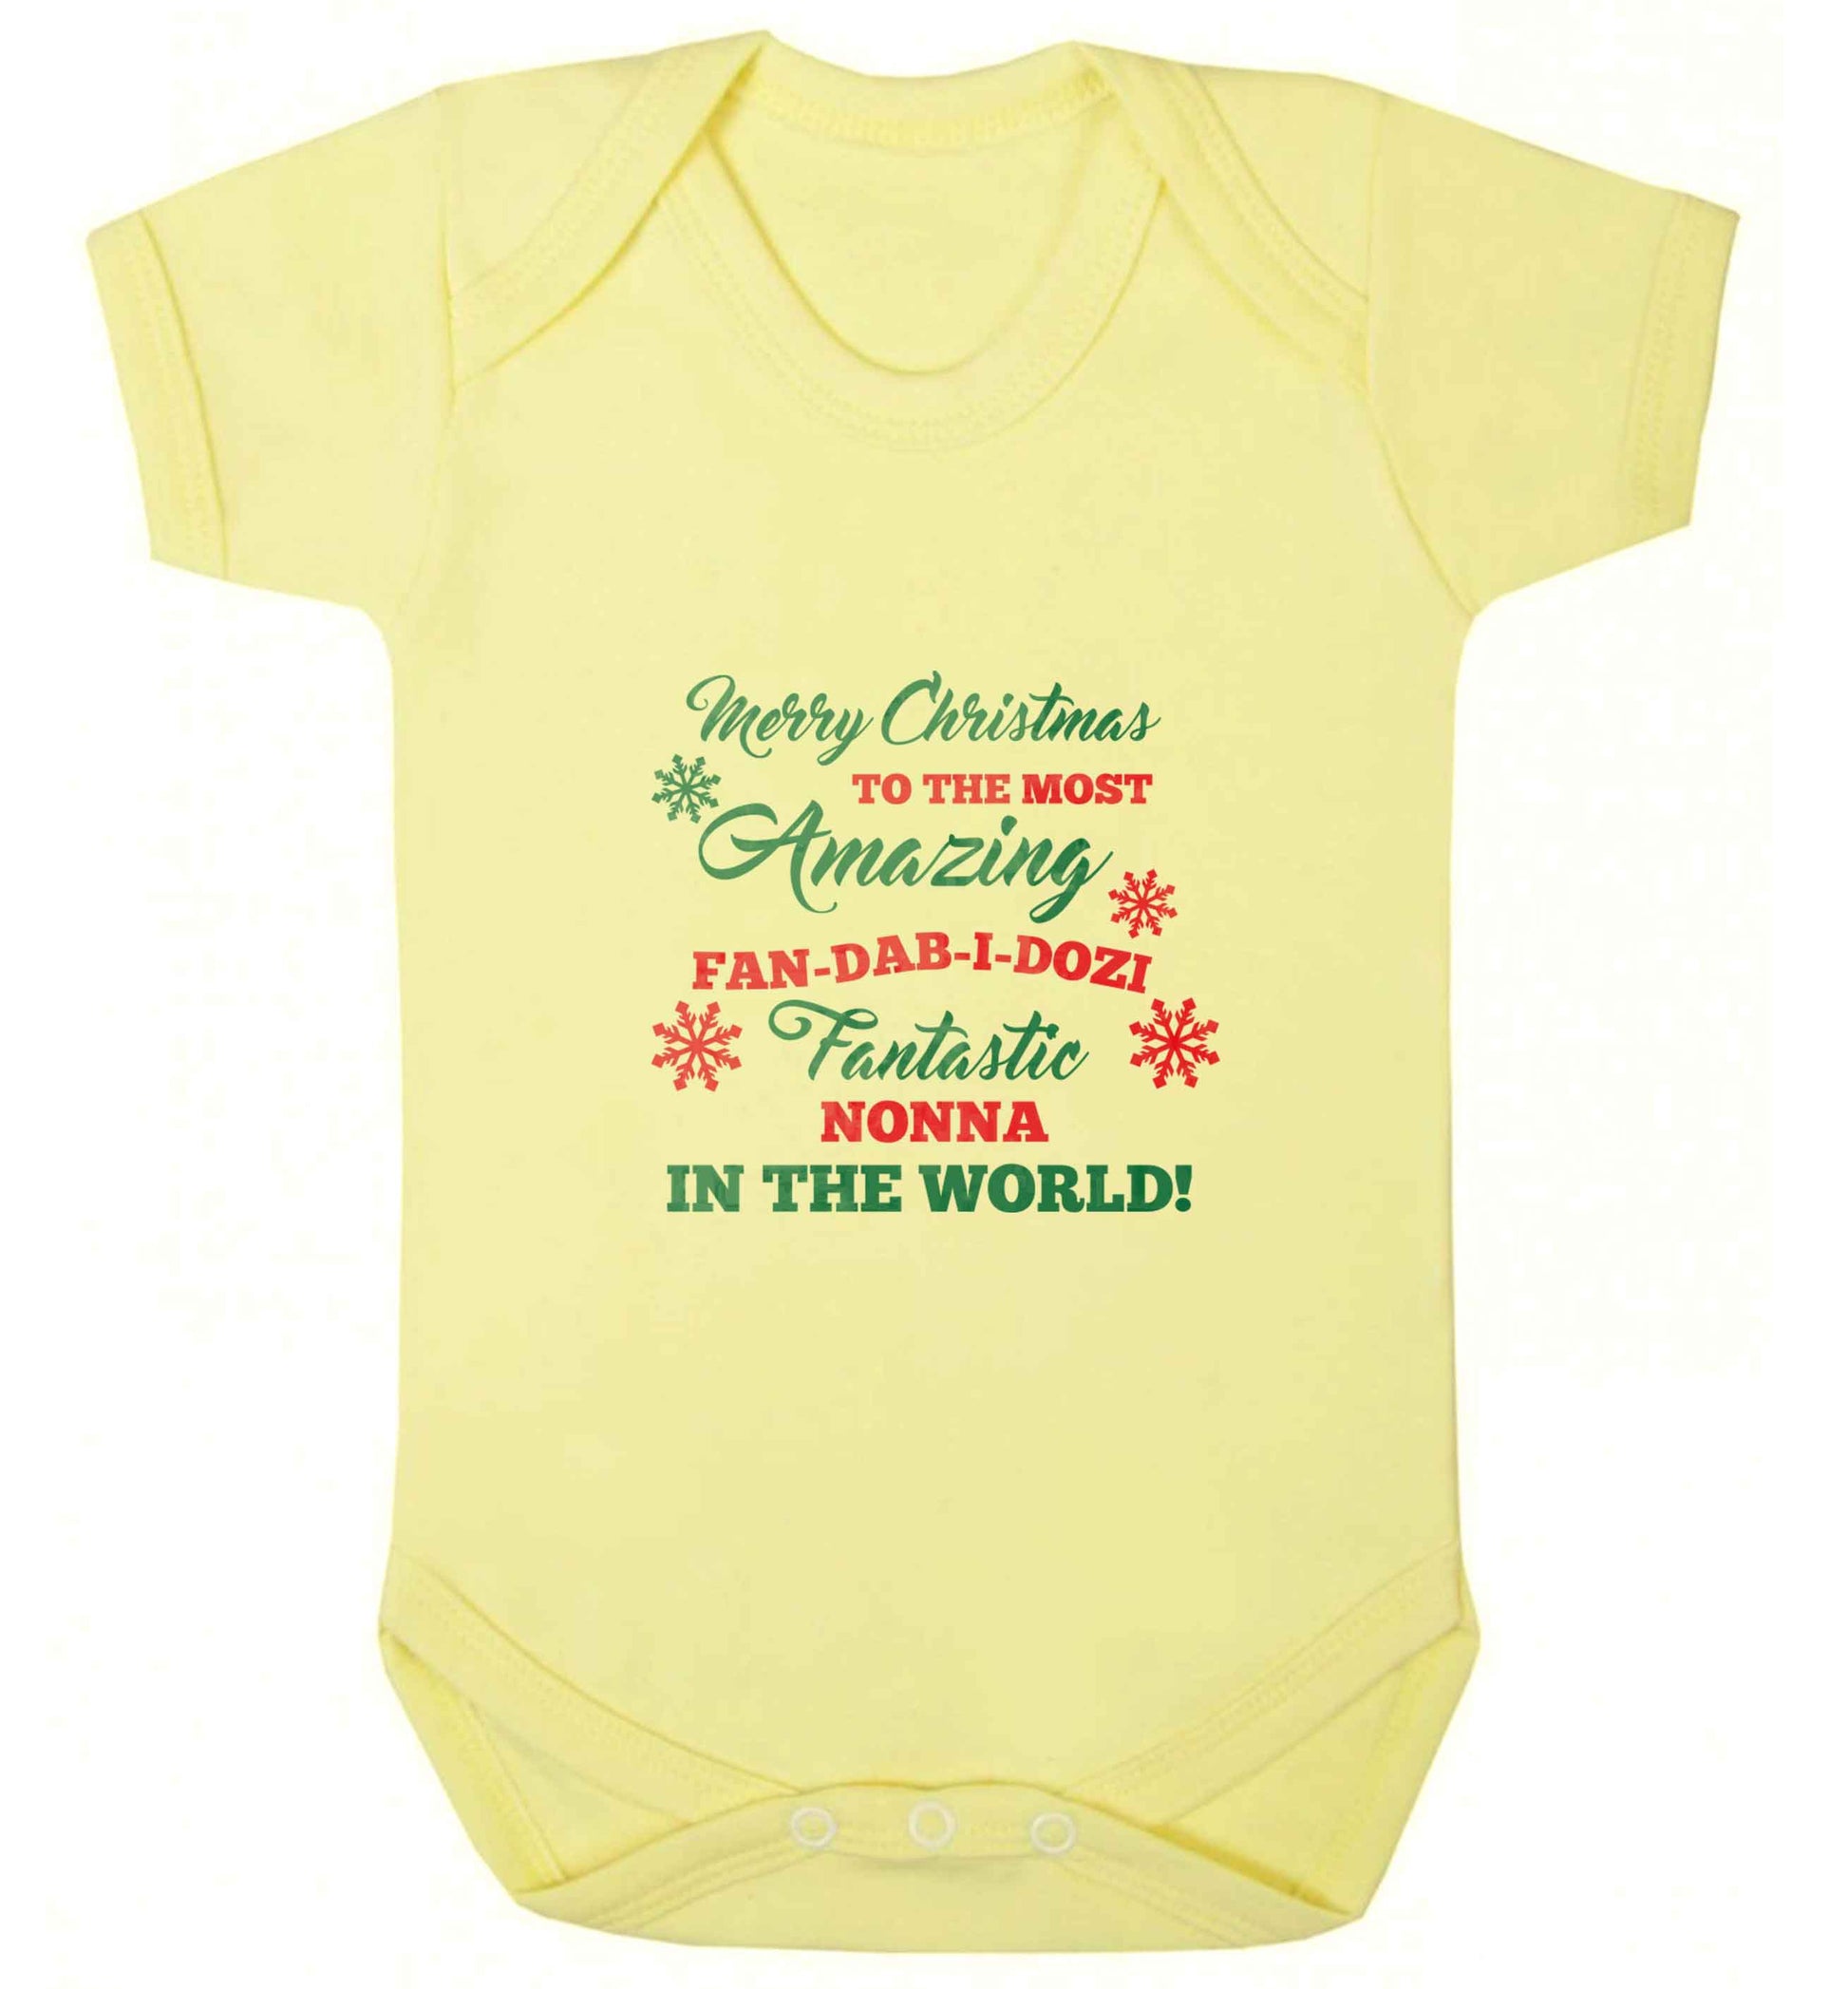 Merry Christmas to the most amazing fan-dab-i-dozi fantasic Nonna in the world baby vest pale yellow 18-24 months